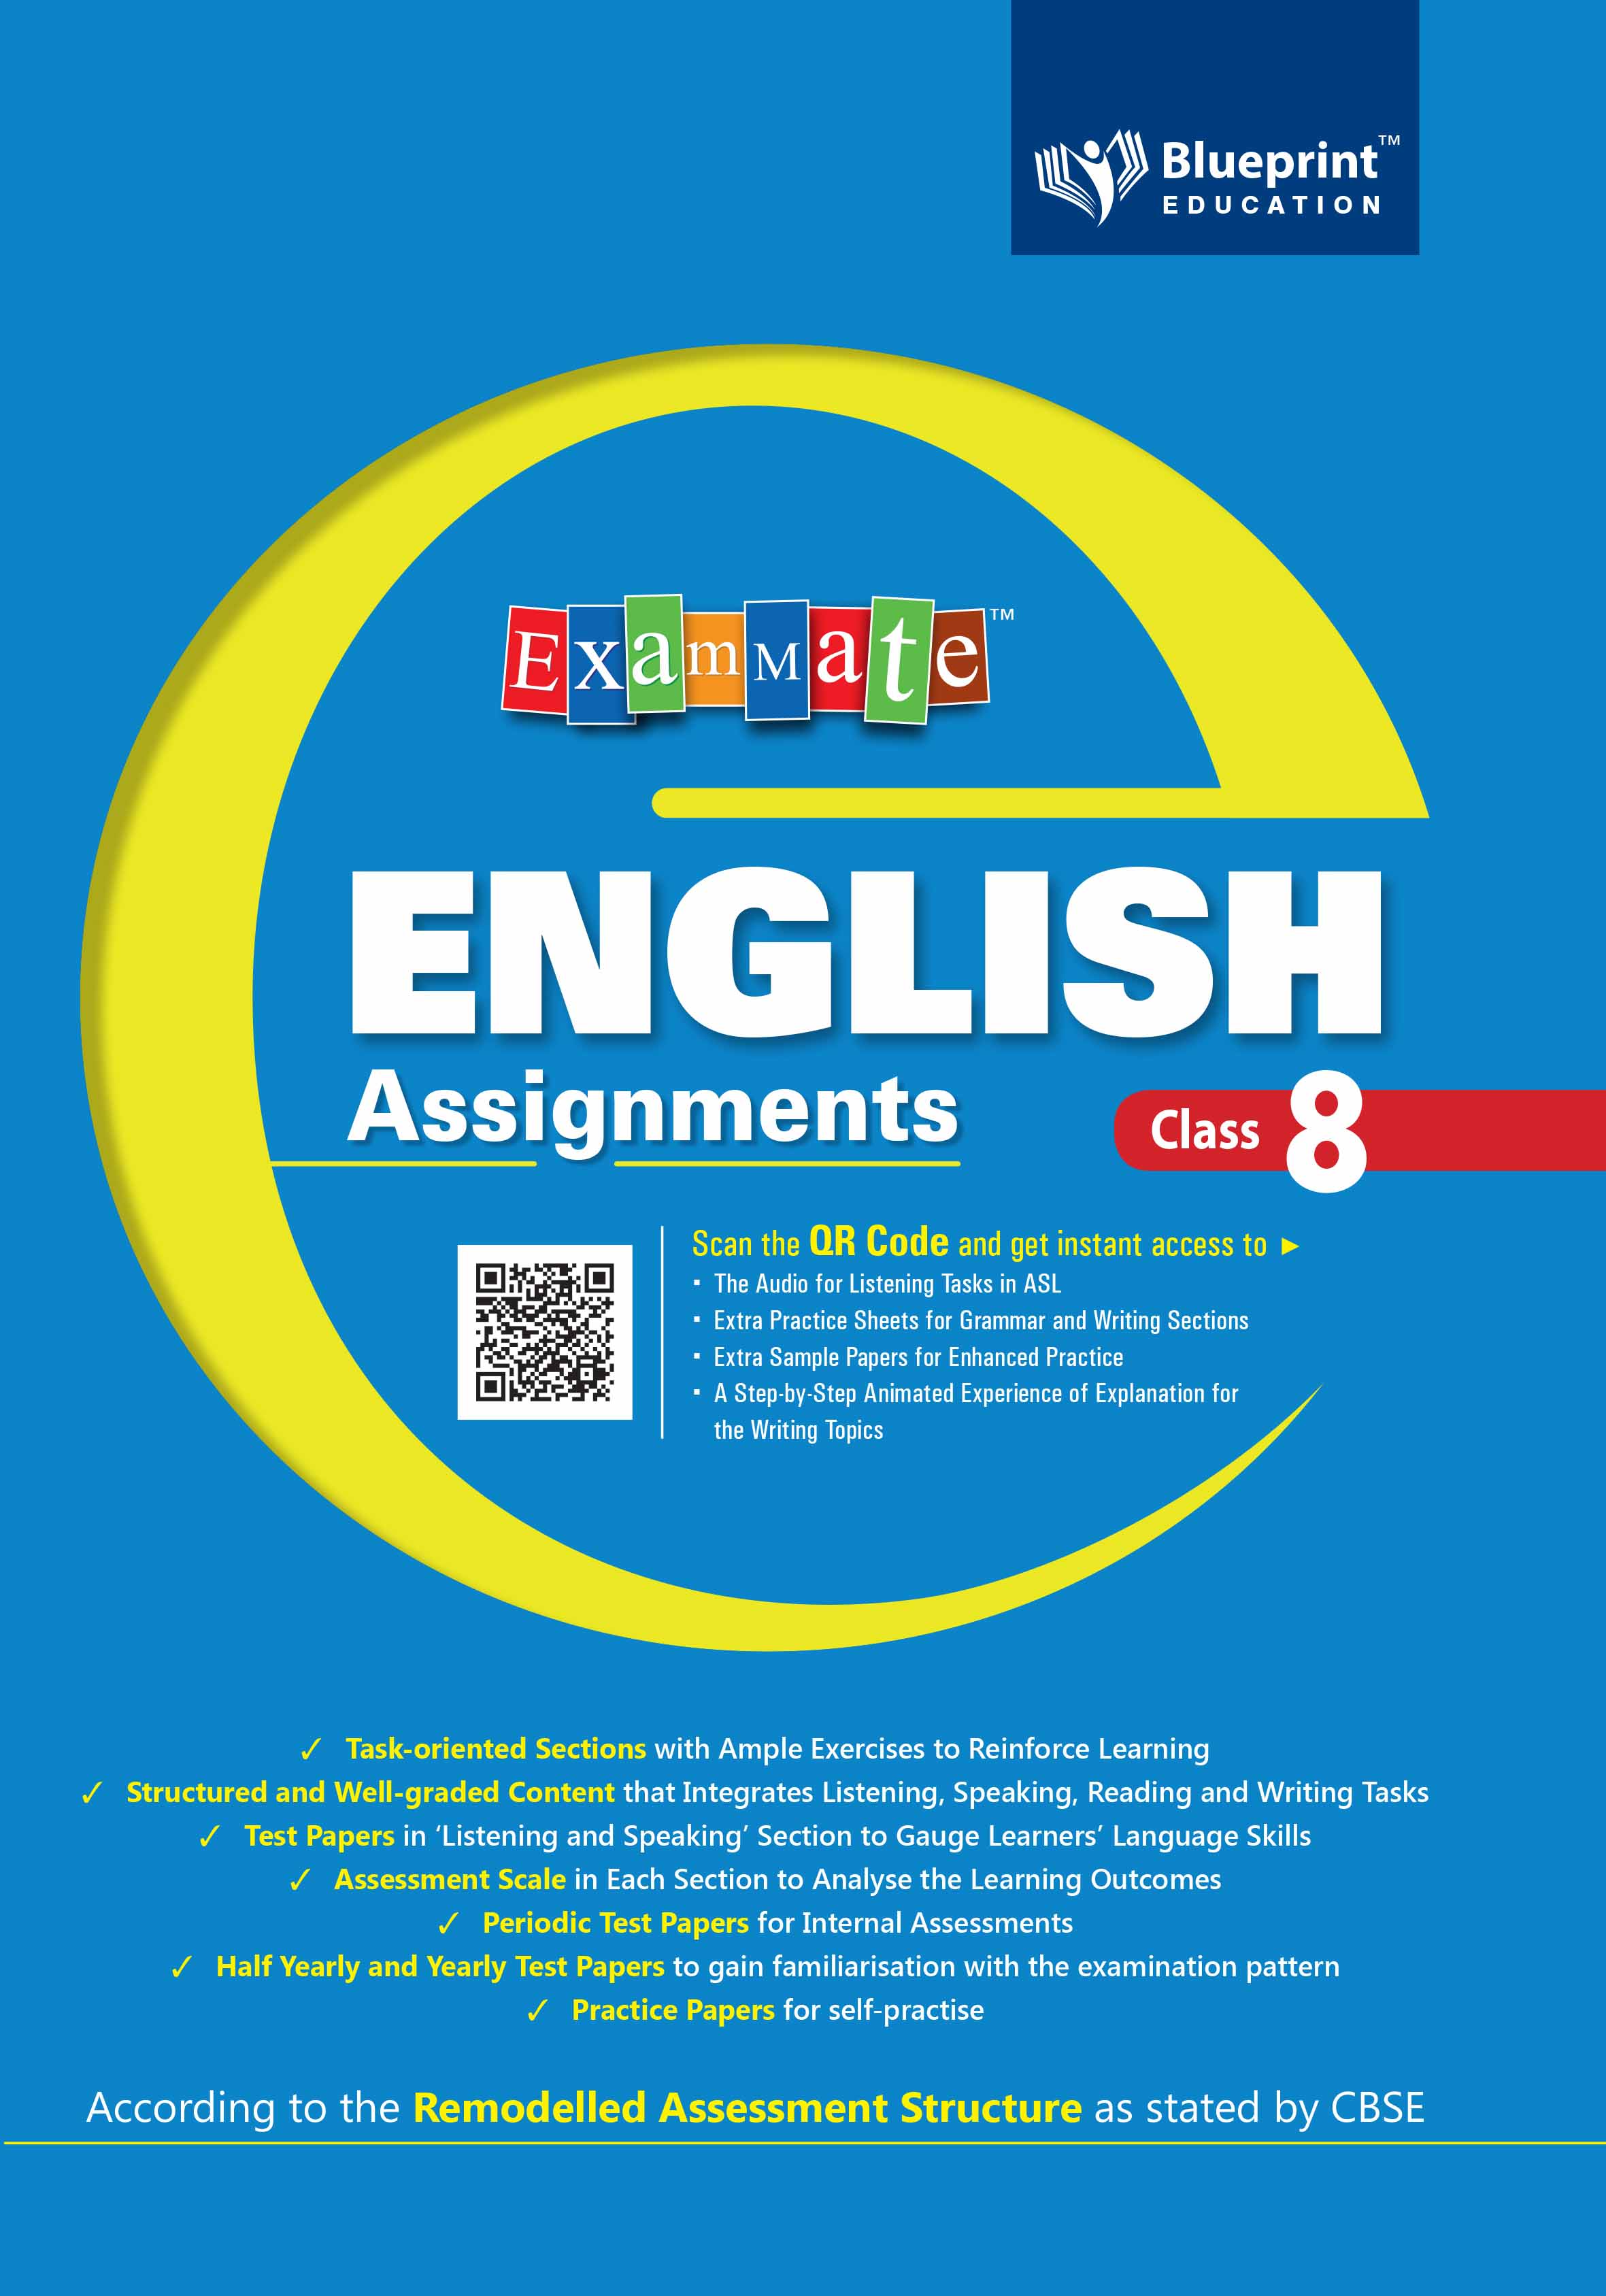 ExamMate English Assignments Class 8 for CBSE Board